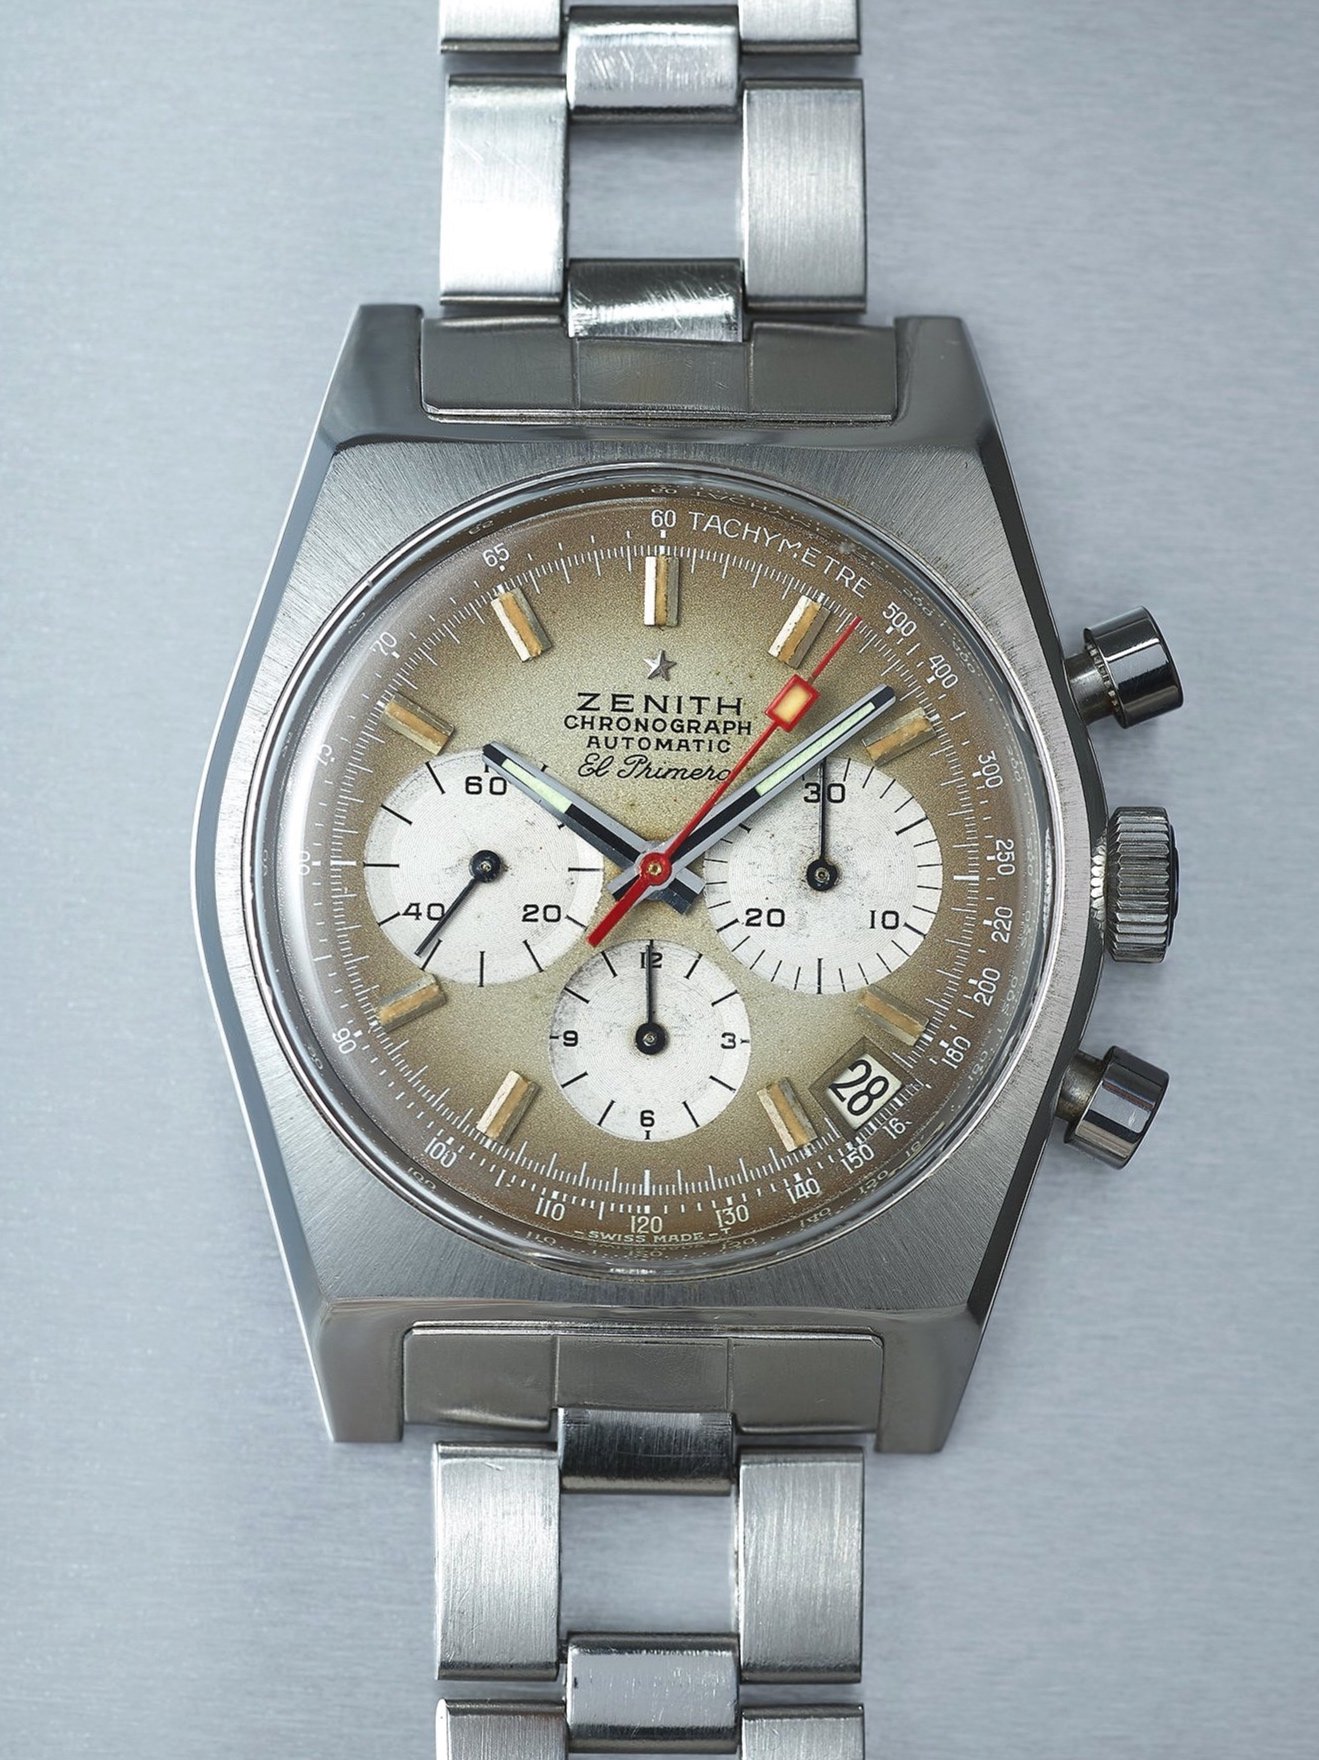 Vintage Zenith A385 watch shot for The Road Rat magazine